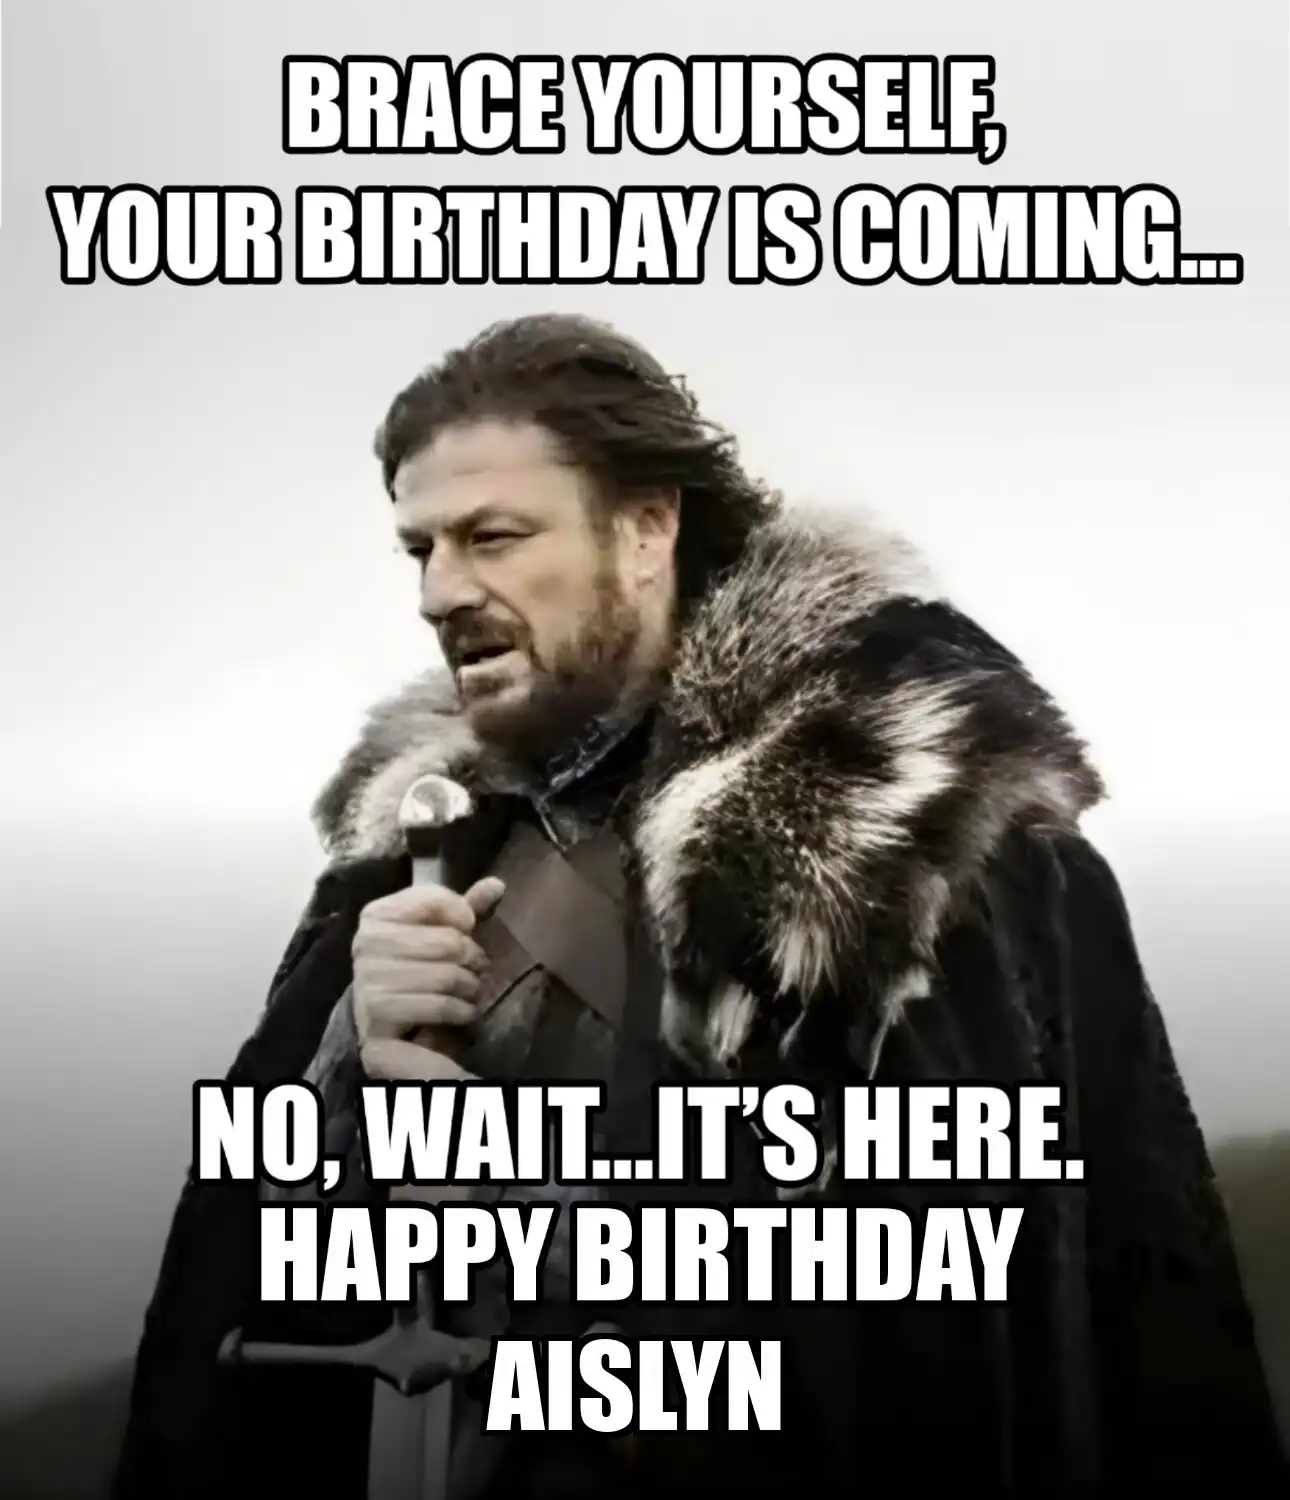 Happy Birthday Aislyn Brace Yourself Your Birthday Is Coming Meme